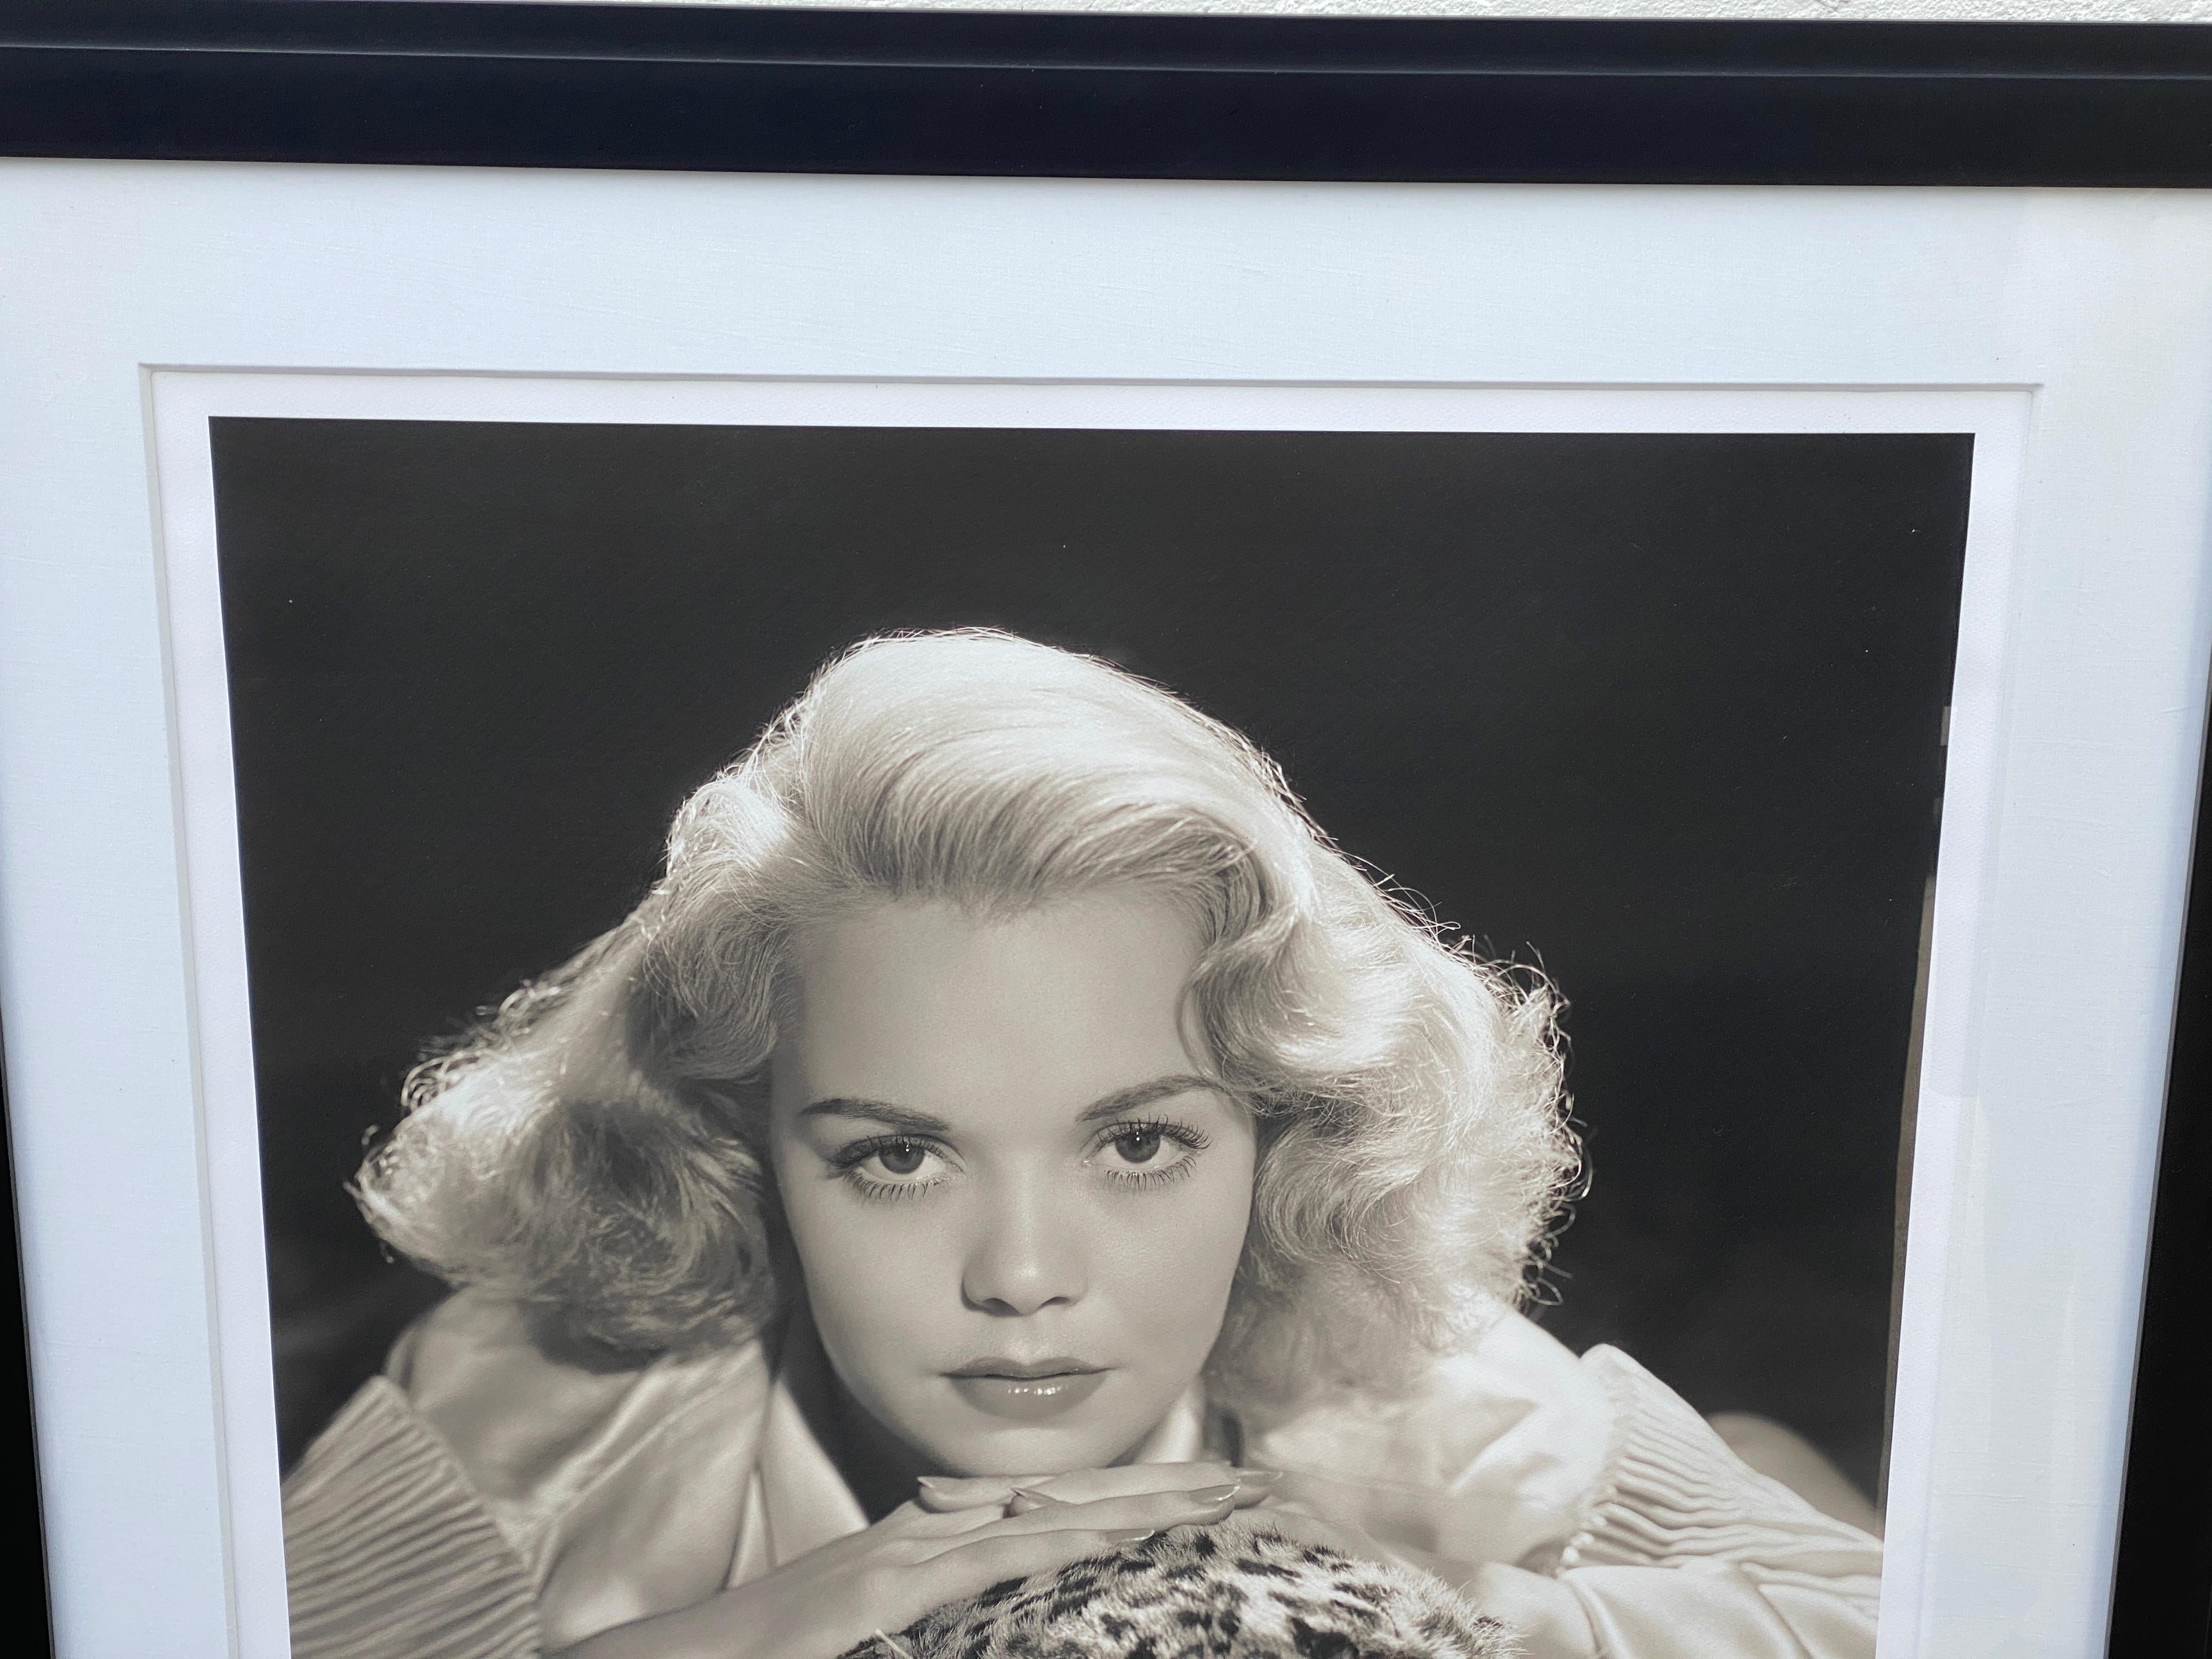 Vintage 2000 George Hurrell Jane Wyman digital photograph From 1938 restored negative from a Palm Beach estate.

This large scale photograph of the iconic, Hollywood movie star Jane Wyman was originally taken in 1938 by George Hurrell. 

This